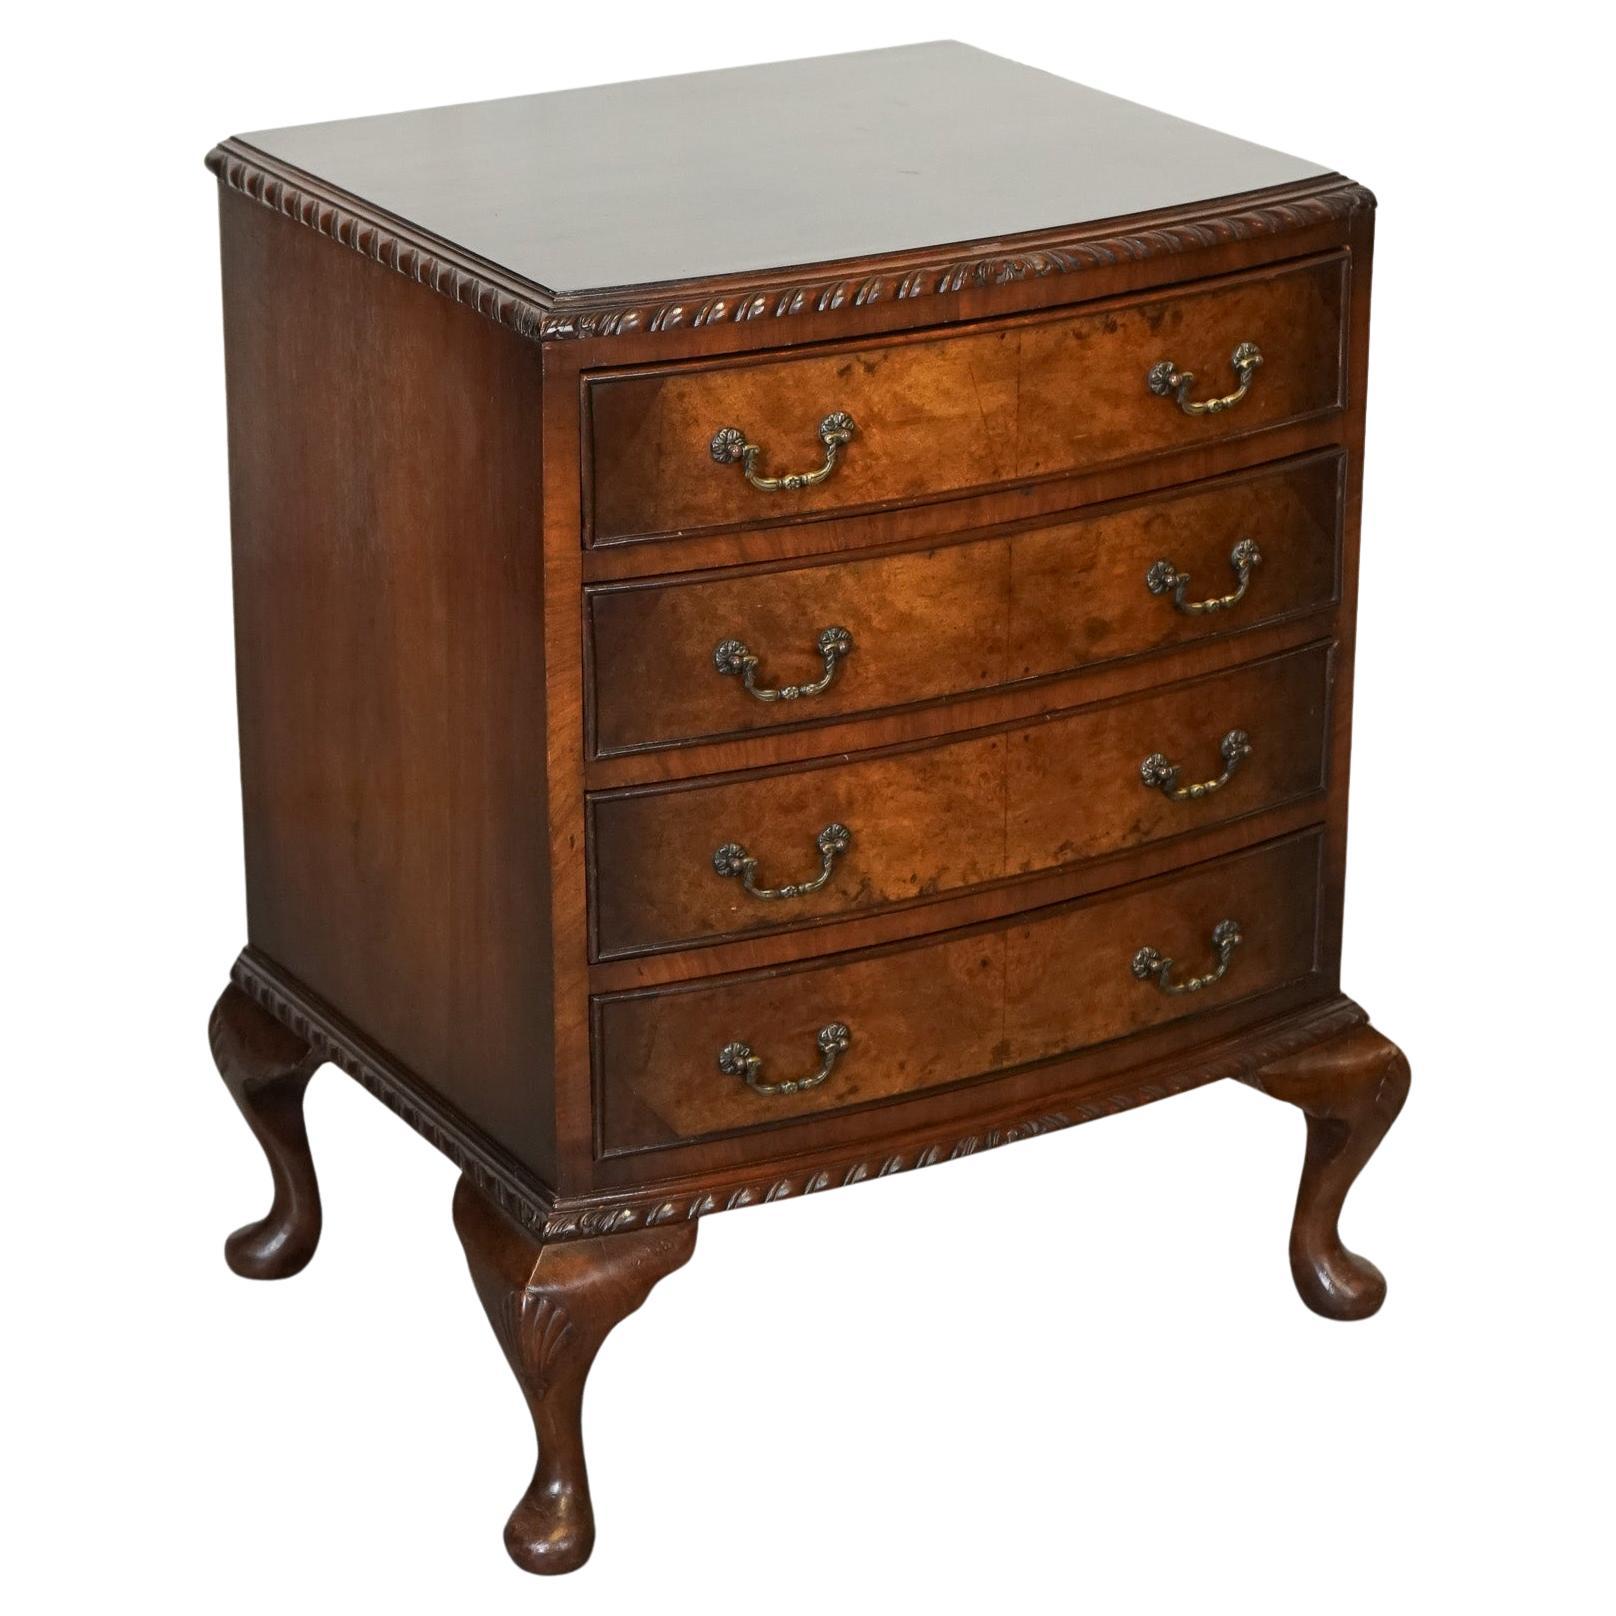 FIGURED VICTORIAN WALNUT BOW FRONTED CHEST OF DRAWERS RAisted ON QUEEN ANNE LEGS im Angebot